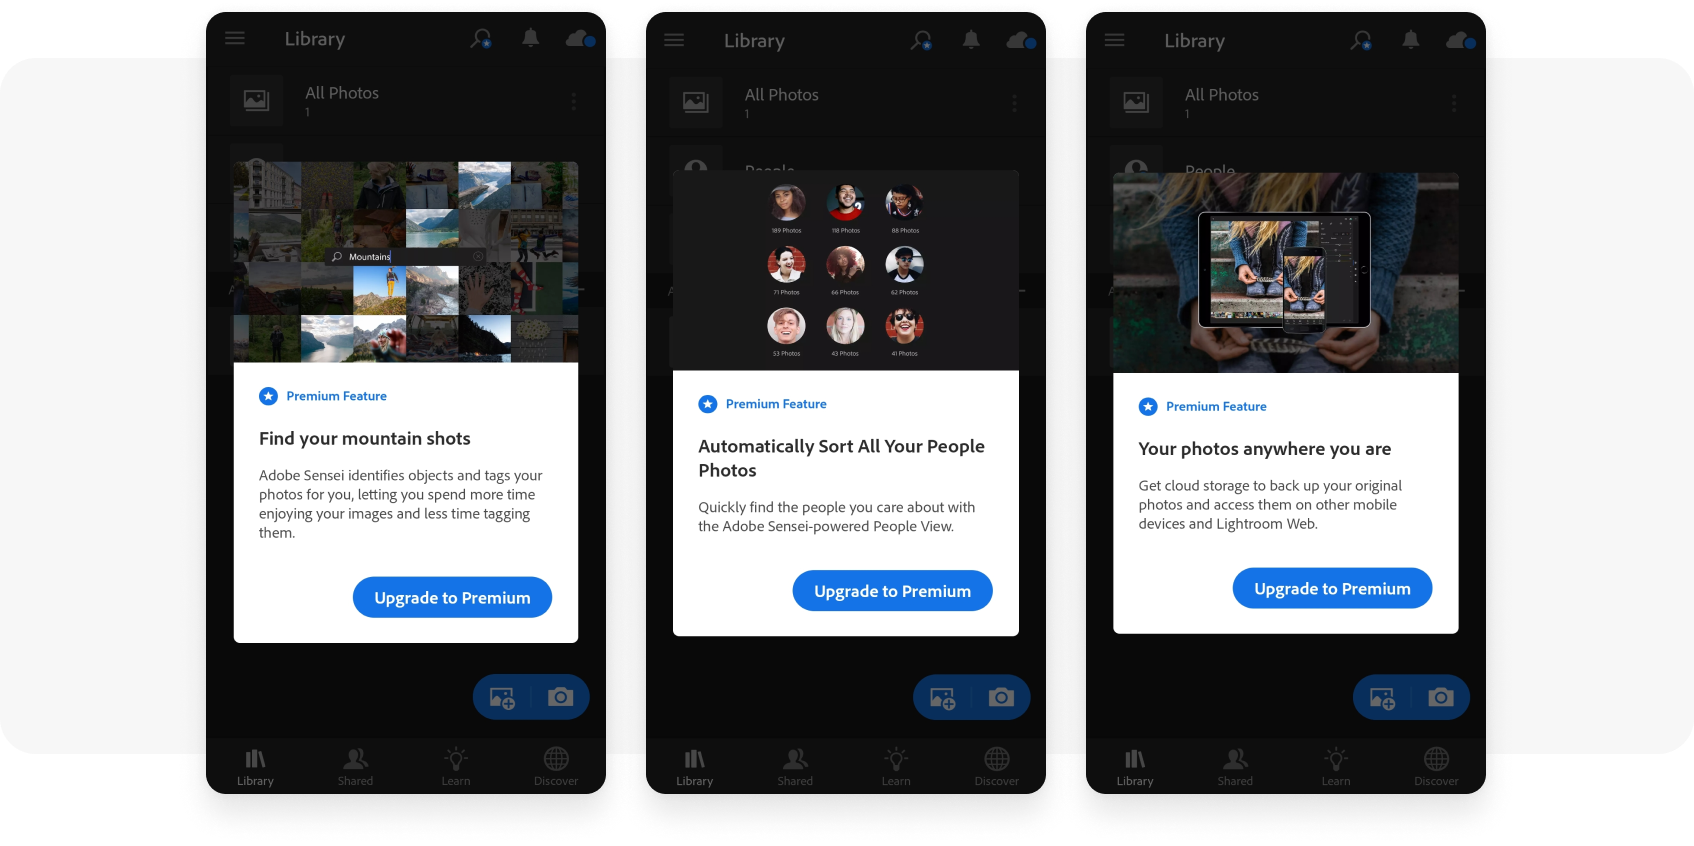 In-apps promoting premium features from Lightroom